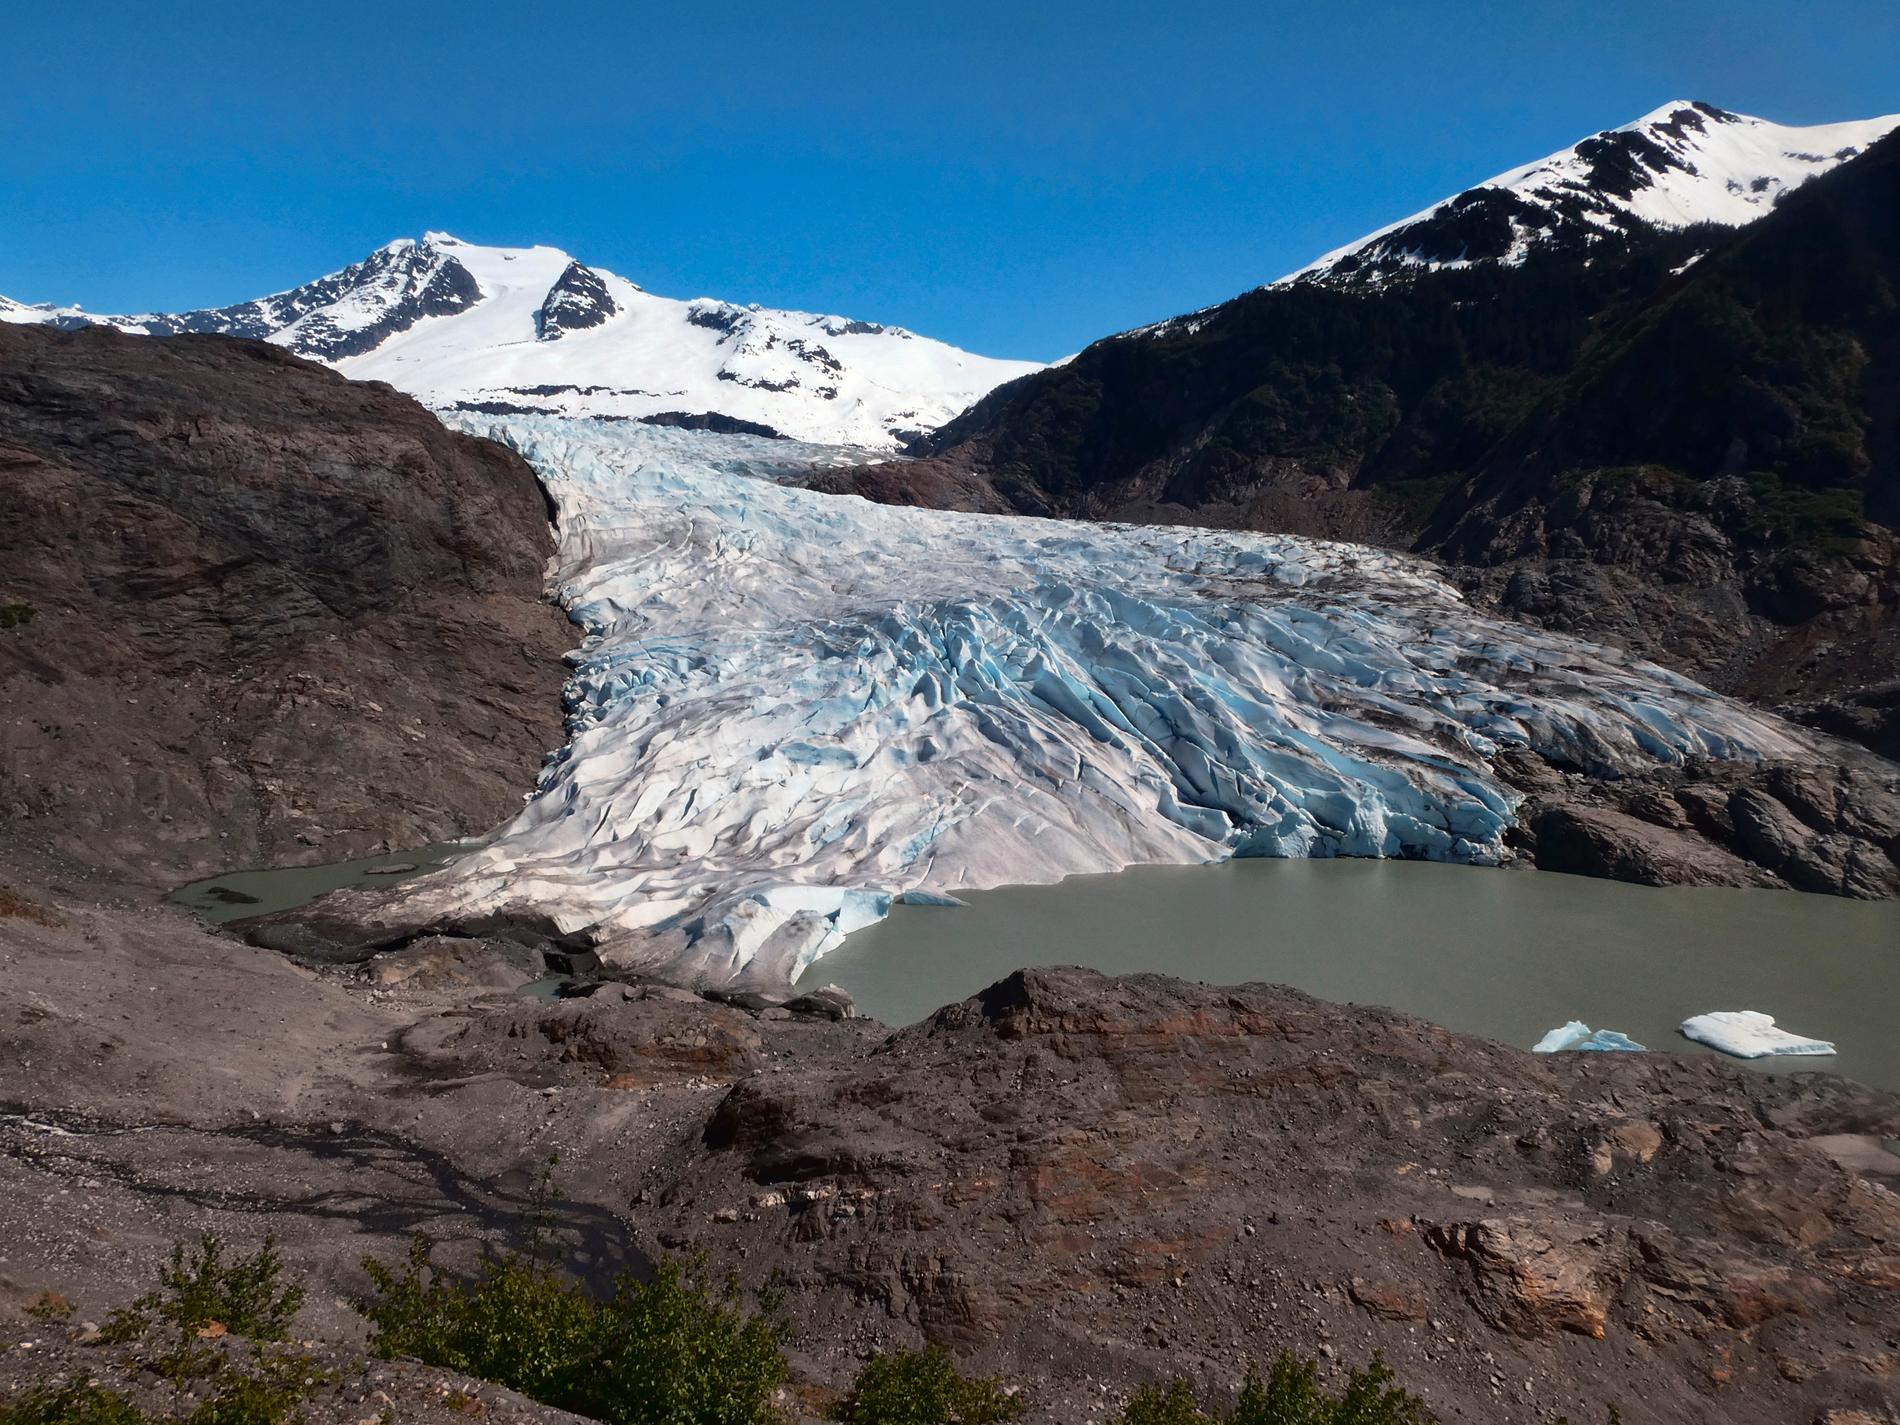 Half of the world’s glaciers may disappear by 2100